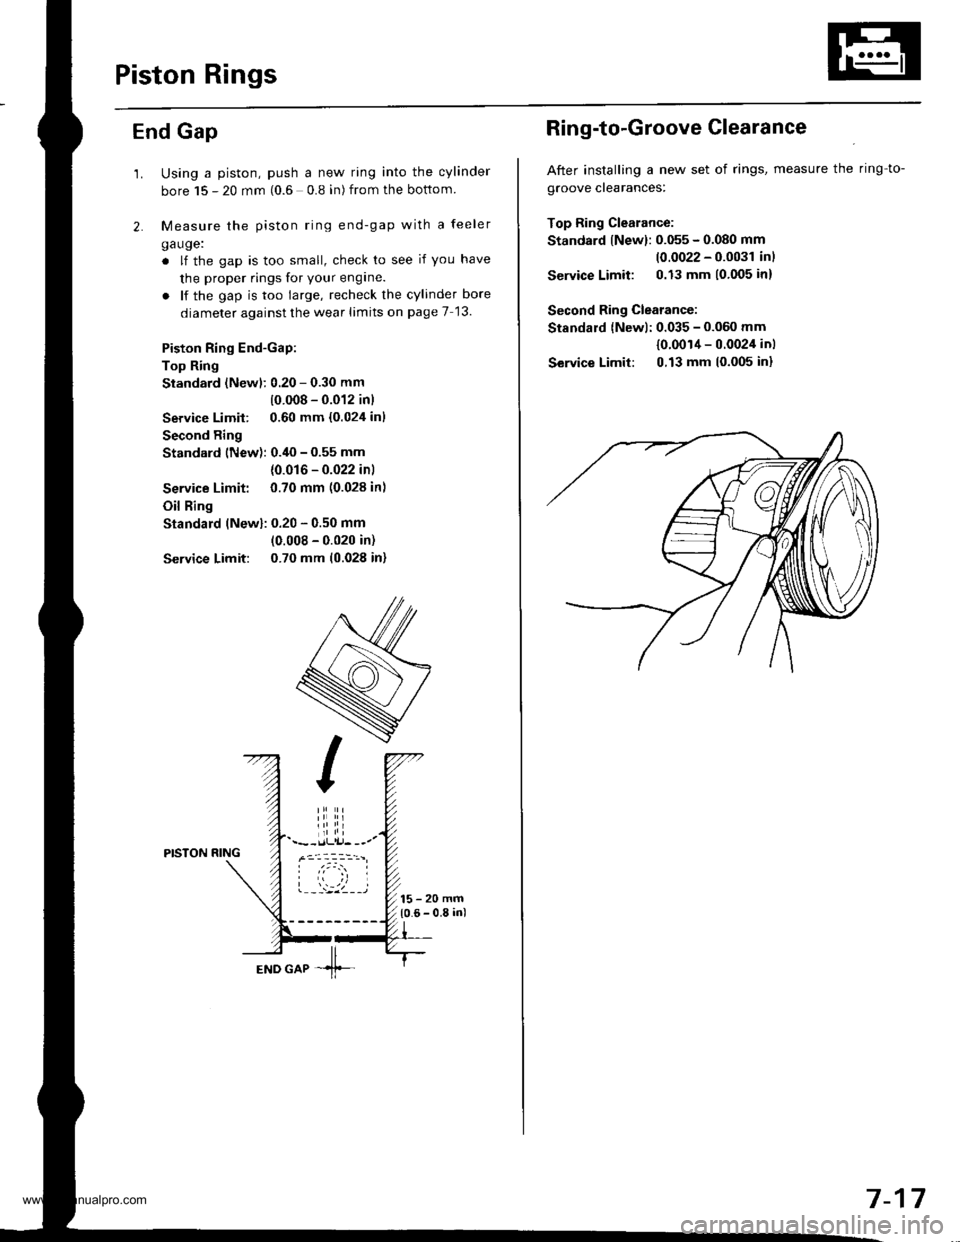 HONDA CR-V 1998 RD1-RD3 / 1.G Owners Manual 
Piston Rings
End Gap
2.
1.Using a piston, push a new ring into the cylinder
bore 15 - 20 mm (0.6 0.8 in) from the bottom
Measure the piston ring end-gap with a feeler
ga uge:
. lf the gap is too smal